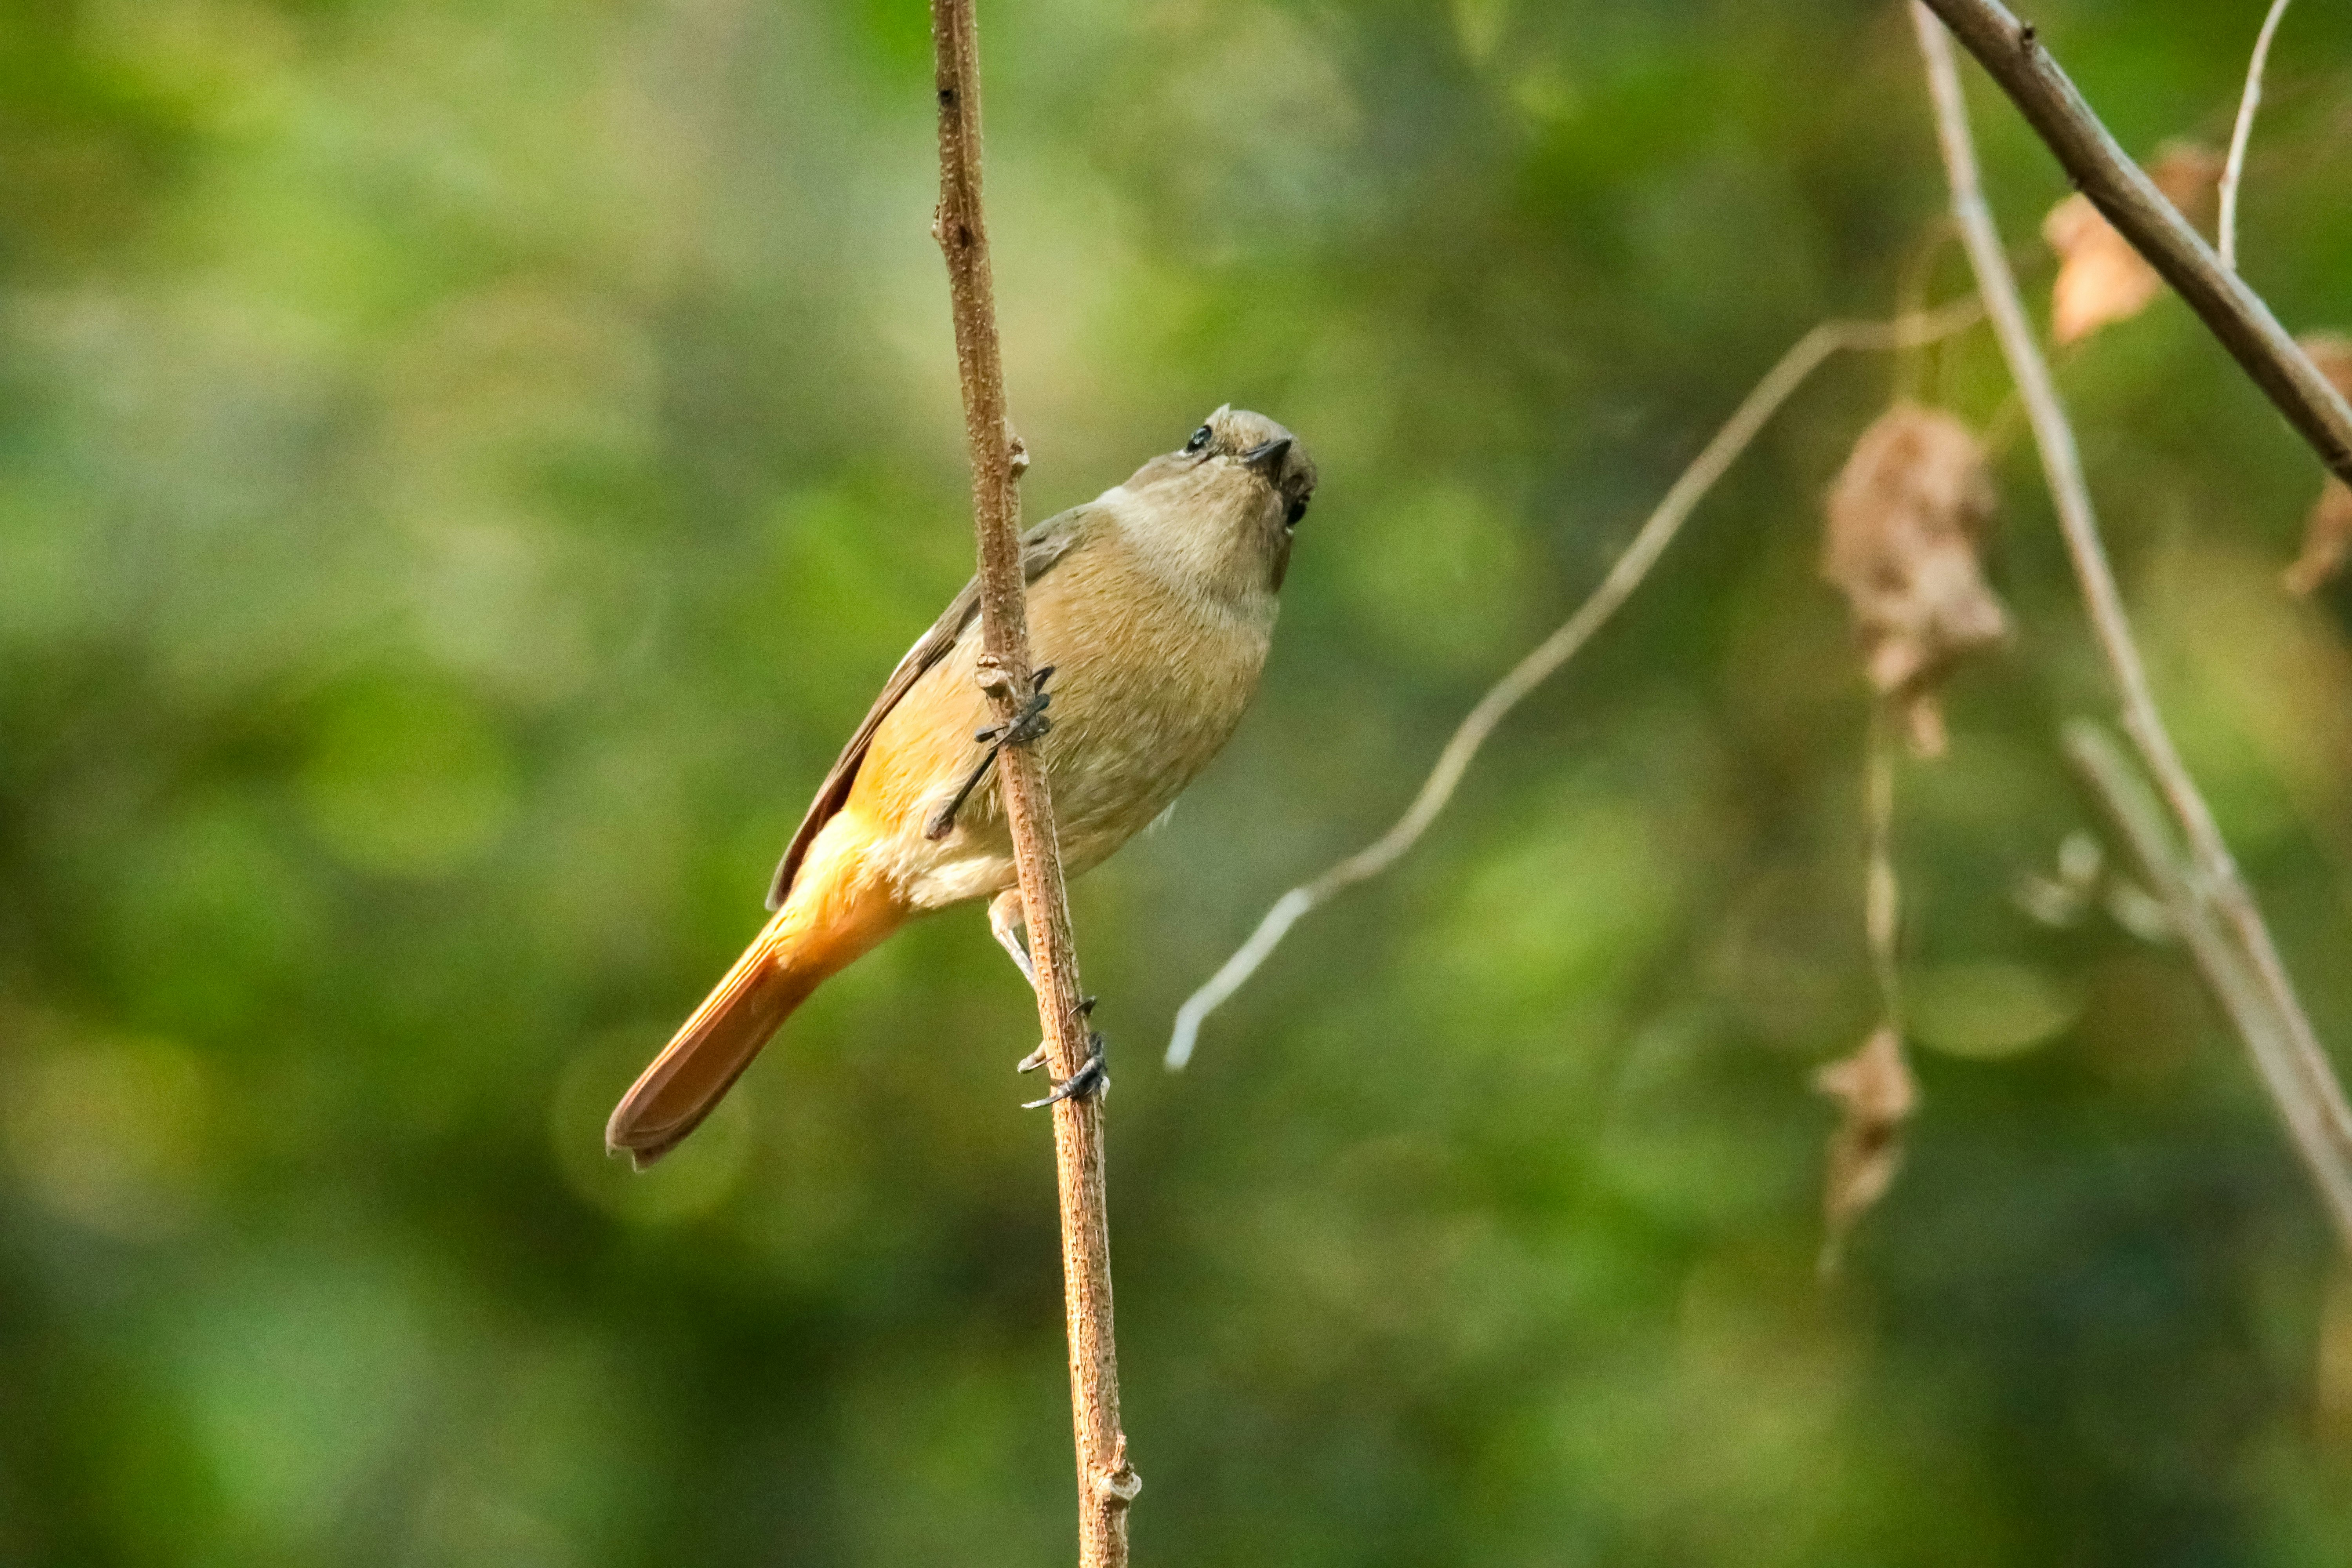 brown and gray bird on brown tree branch during daytime